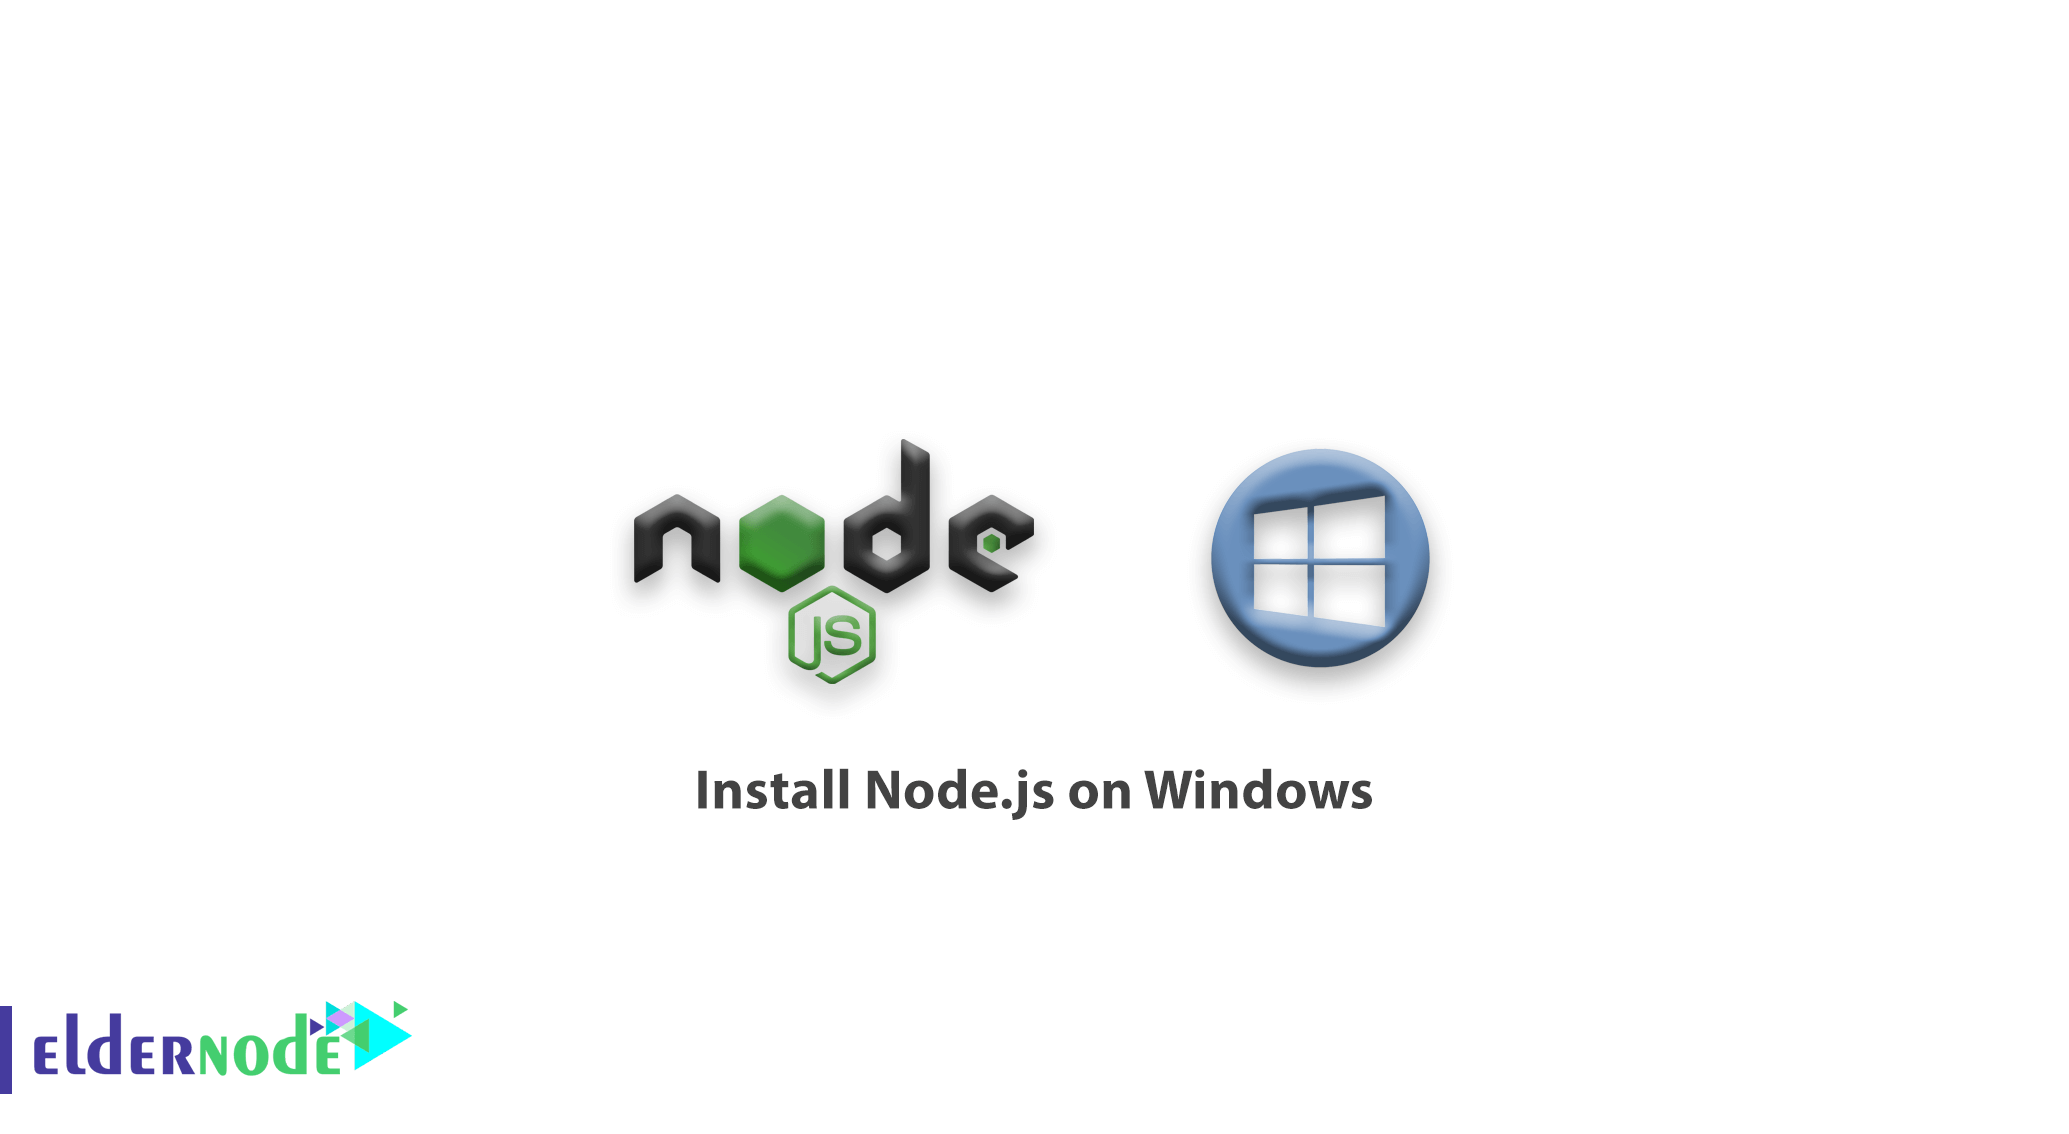 How to Install node.js on Windows